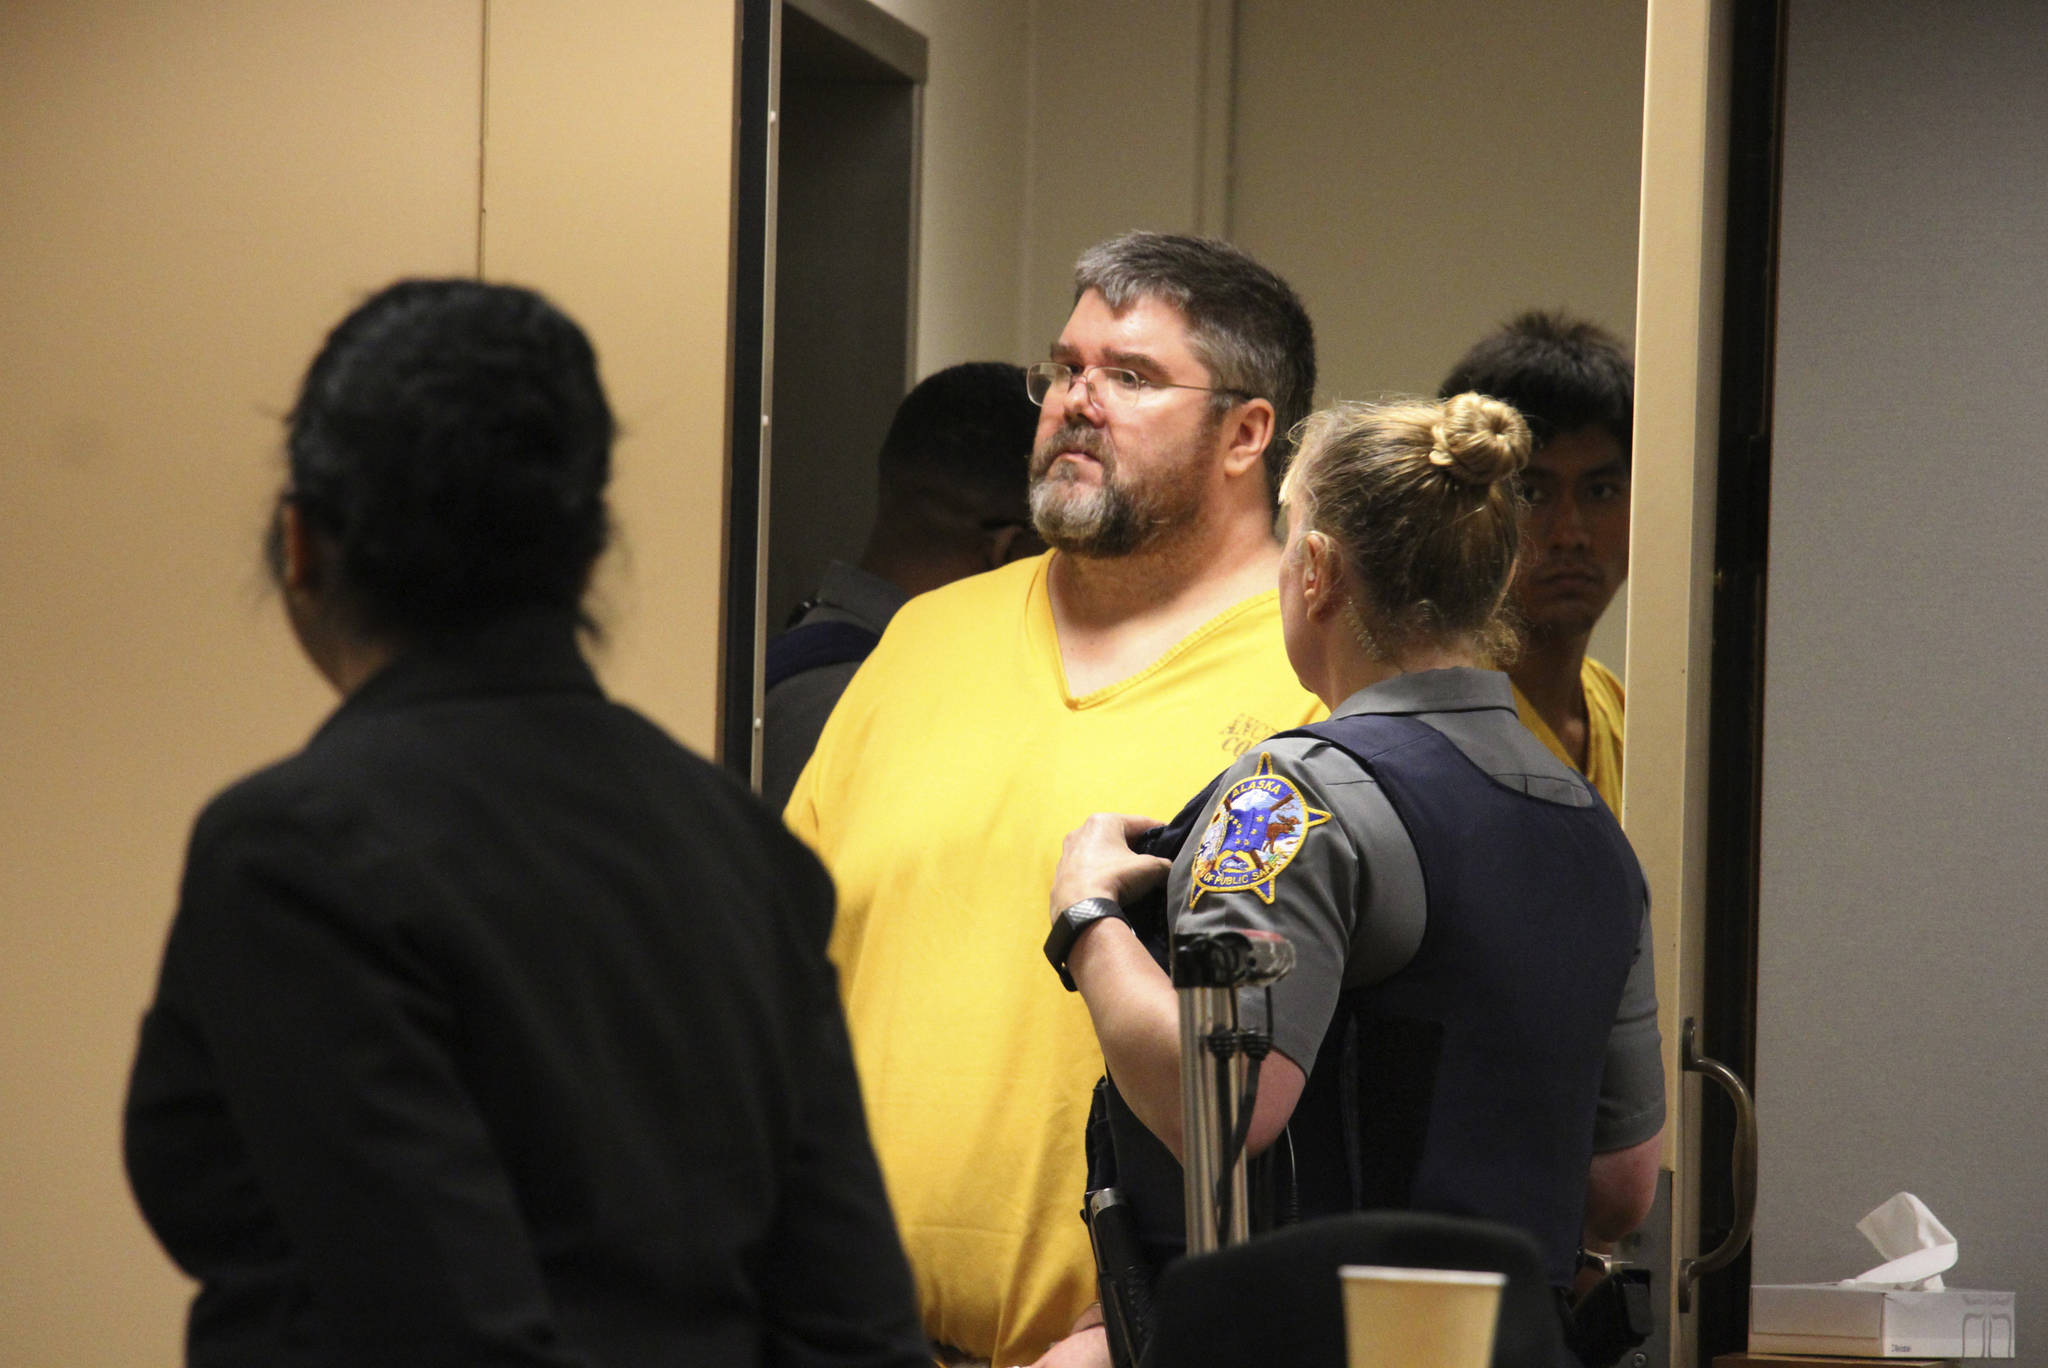 In this Aug. 6 photo, Steven Downs is led into a courtroom for arraignment in Anchorage. Downs has pleaded not guilty after being charged in the sexual assault and murder of a woman in Alaska in a case that remained unsolved for years. Downs entered his plea Wednesday in a courtroom in Fairbanks. He is charged in the death of Sophie Sergie, who was found stabbed and shot in a bathtub at a University of Alaska Fairbanks dormitory. (AP Photo | Mark Thiessen)